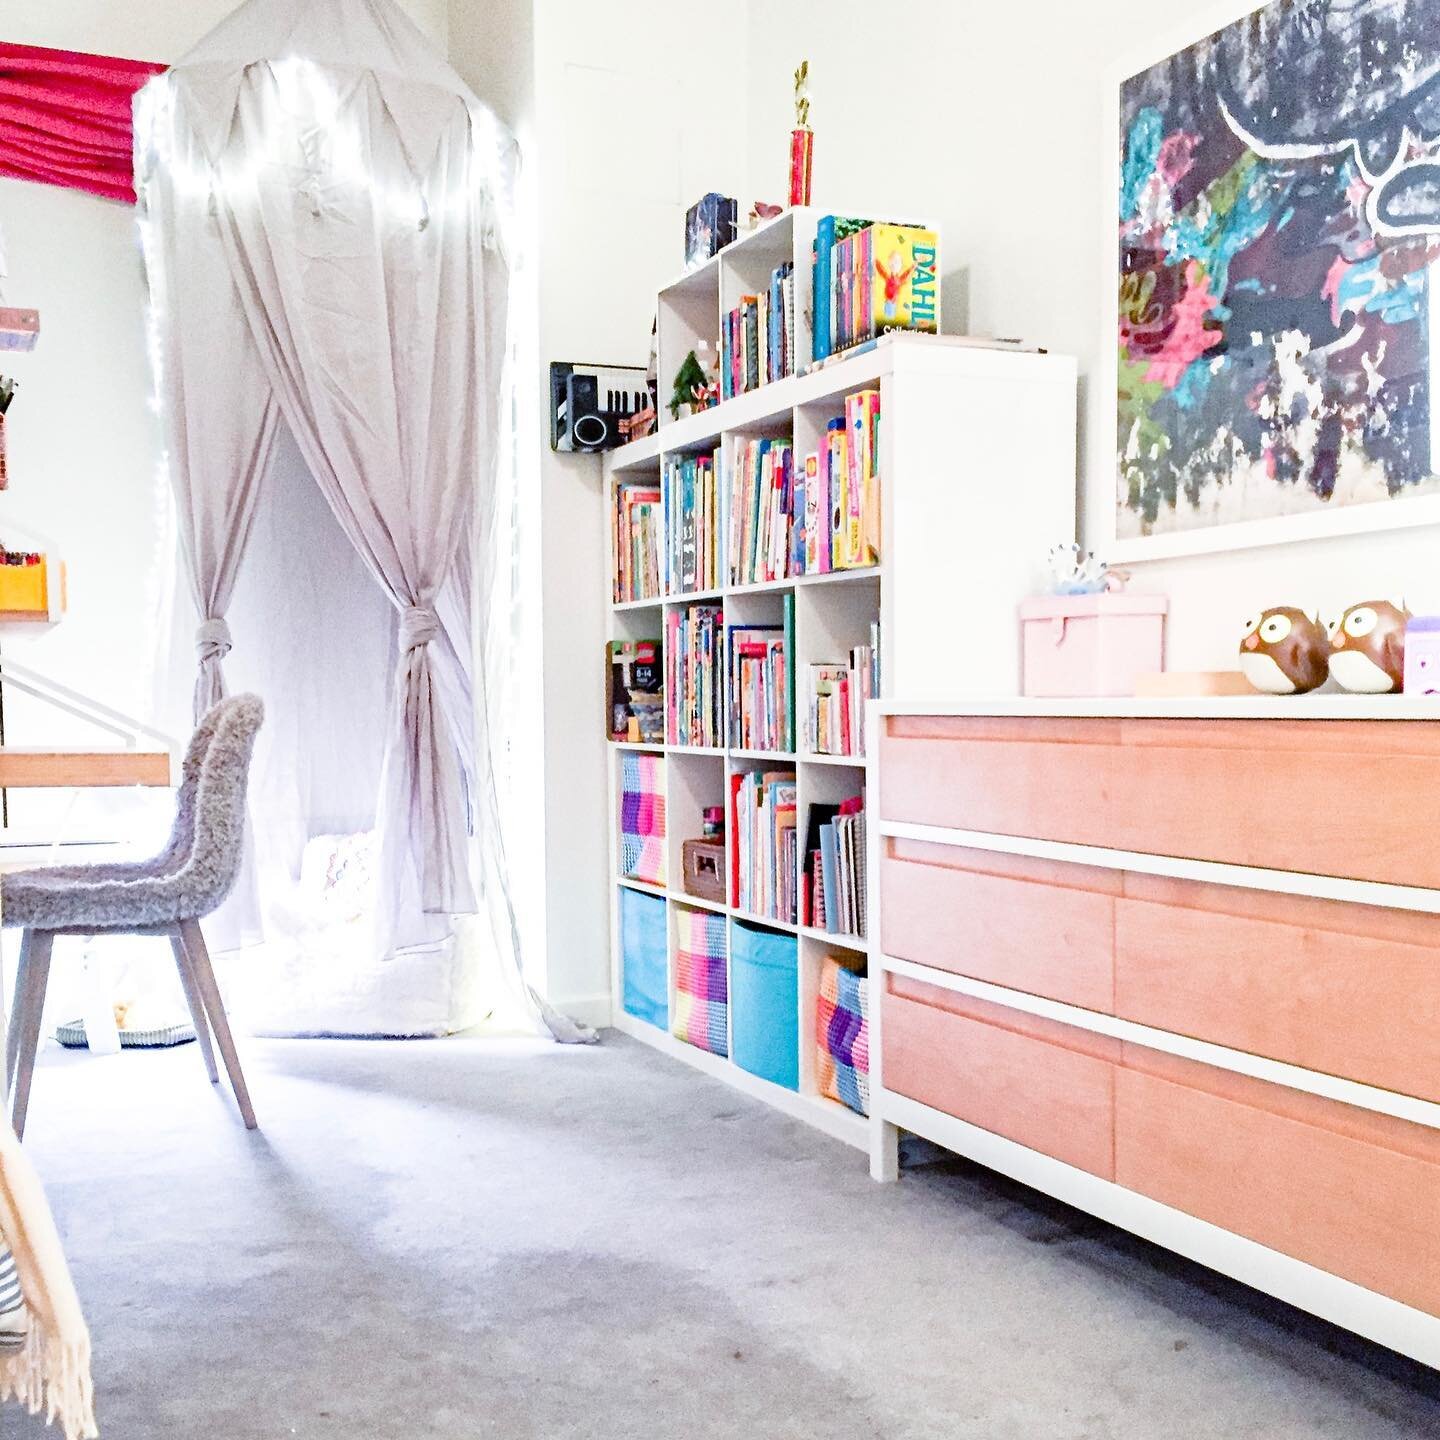 ✨ I loved working on this room makeover to surprise a 10 year old girl! 🦄
.
&ldquo;Paulina magically transformed the room and thought of even the smallest details!
She turned one corner of the room into a super cozy reading nook, she optimized the s